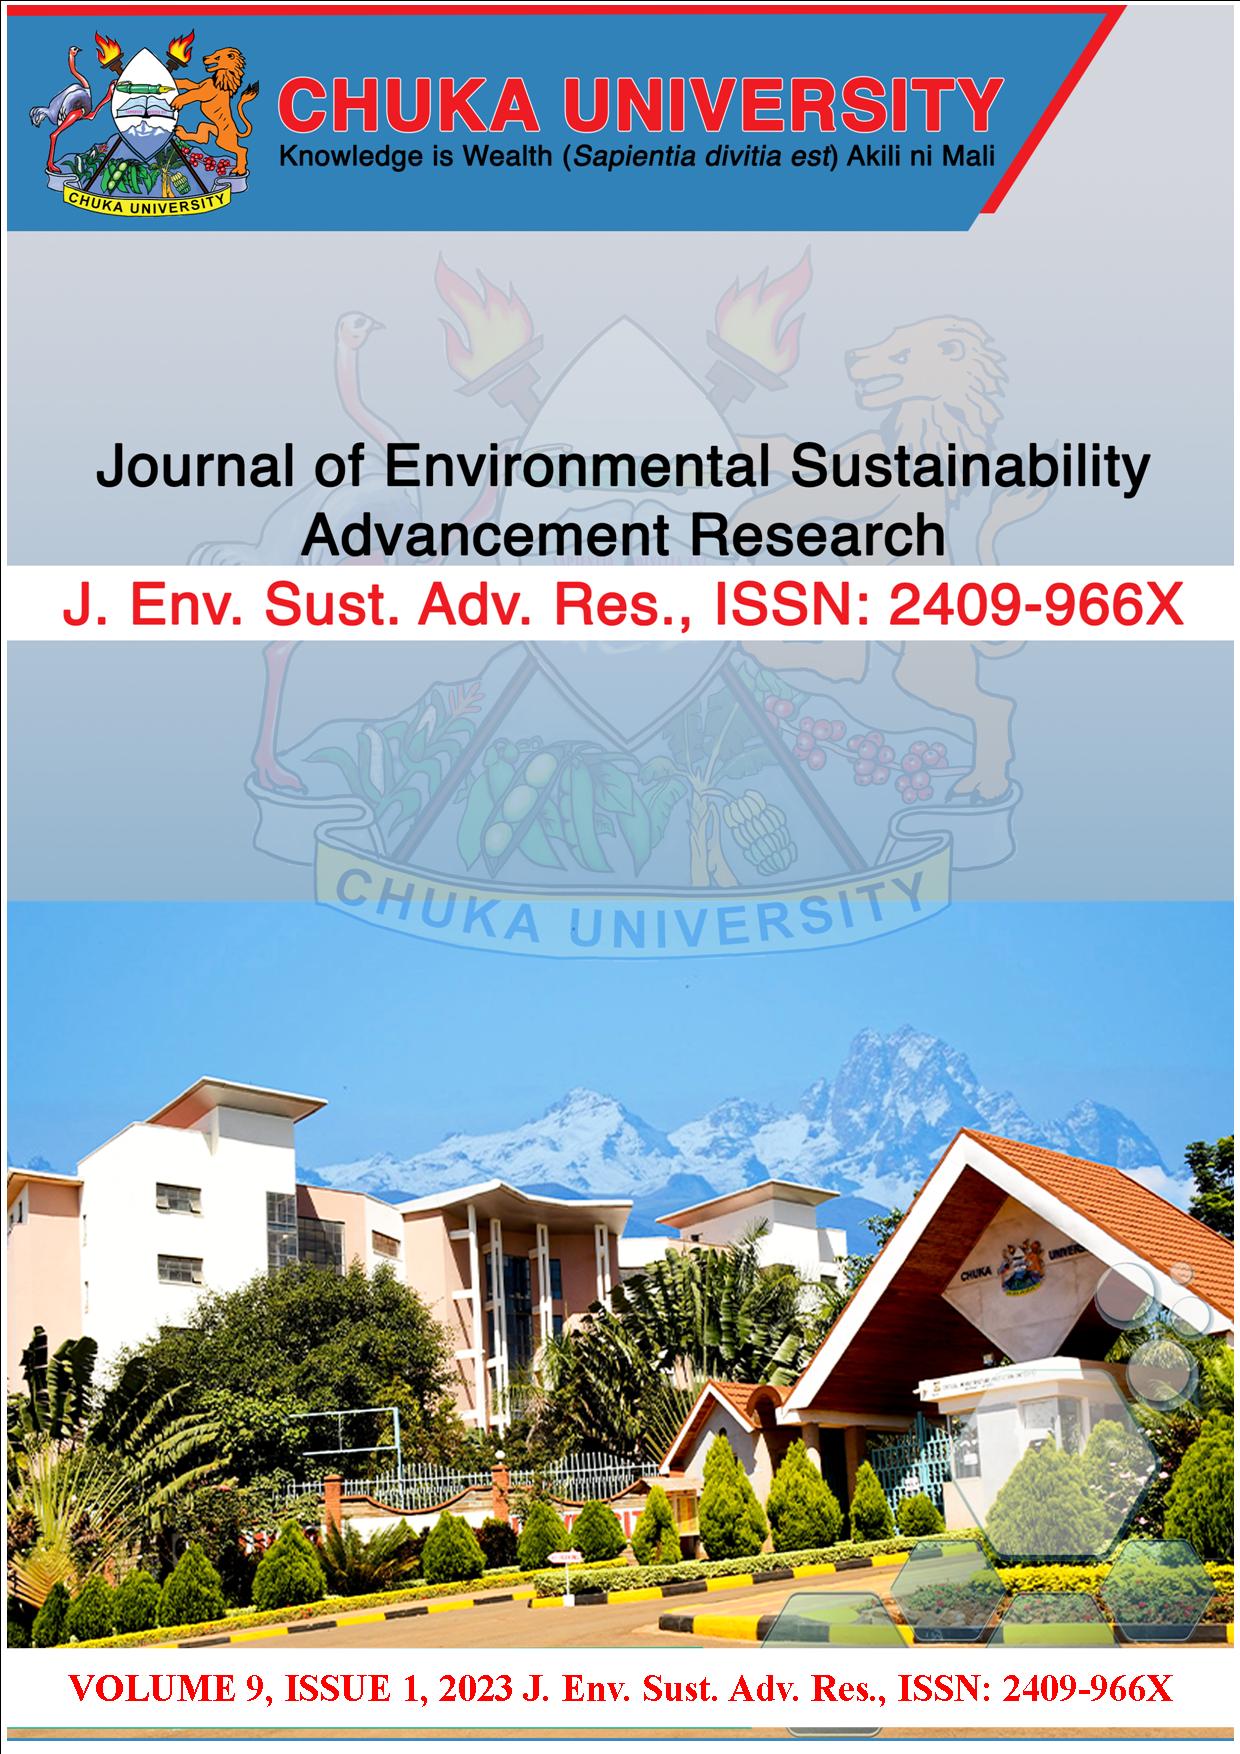 					View Vol. 9 No. 1 (2023): Journal of Environmental Sustainability Advancement Research
				